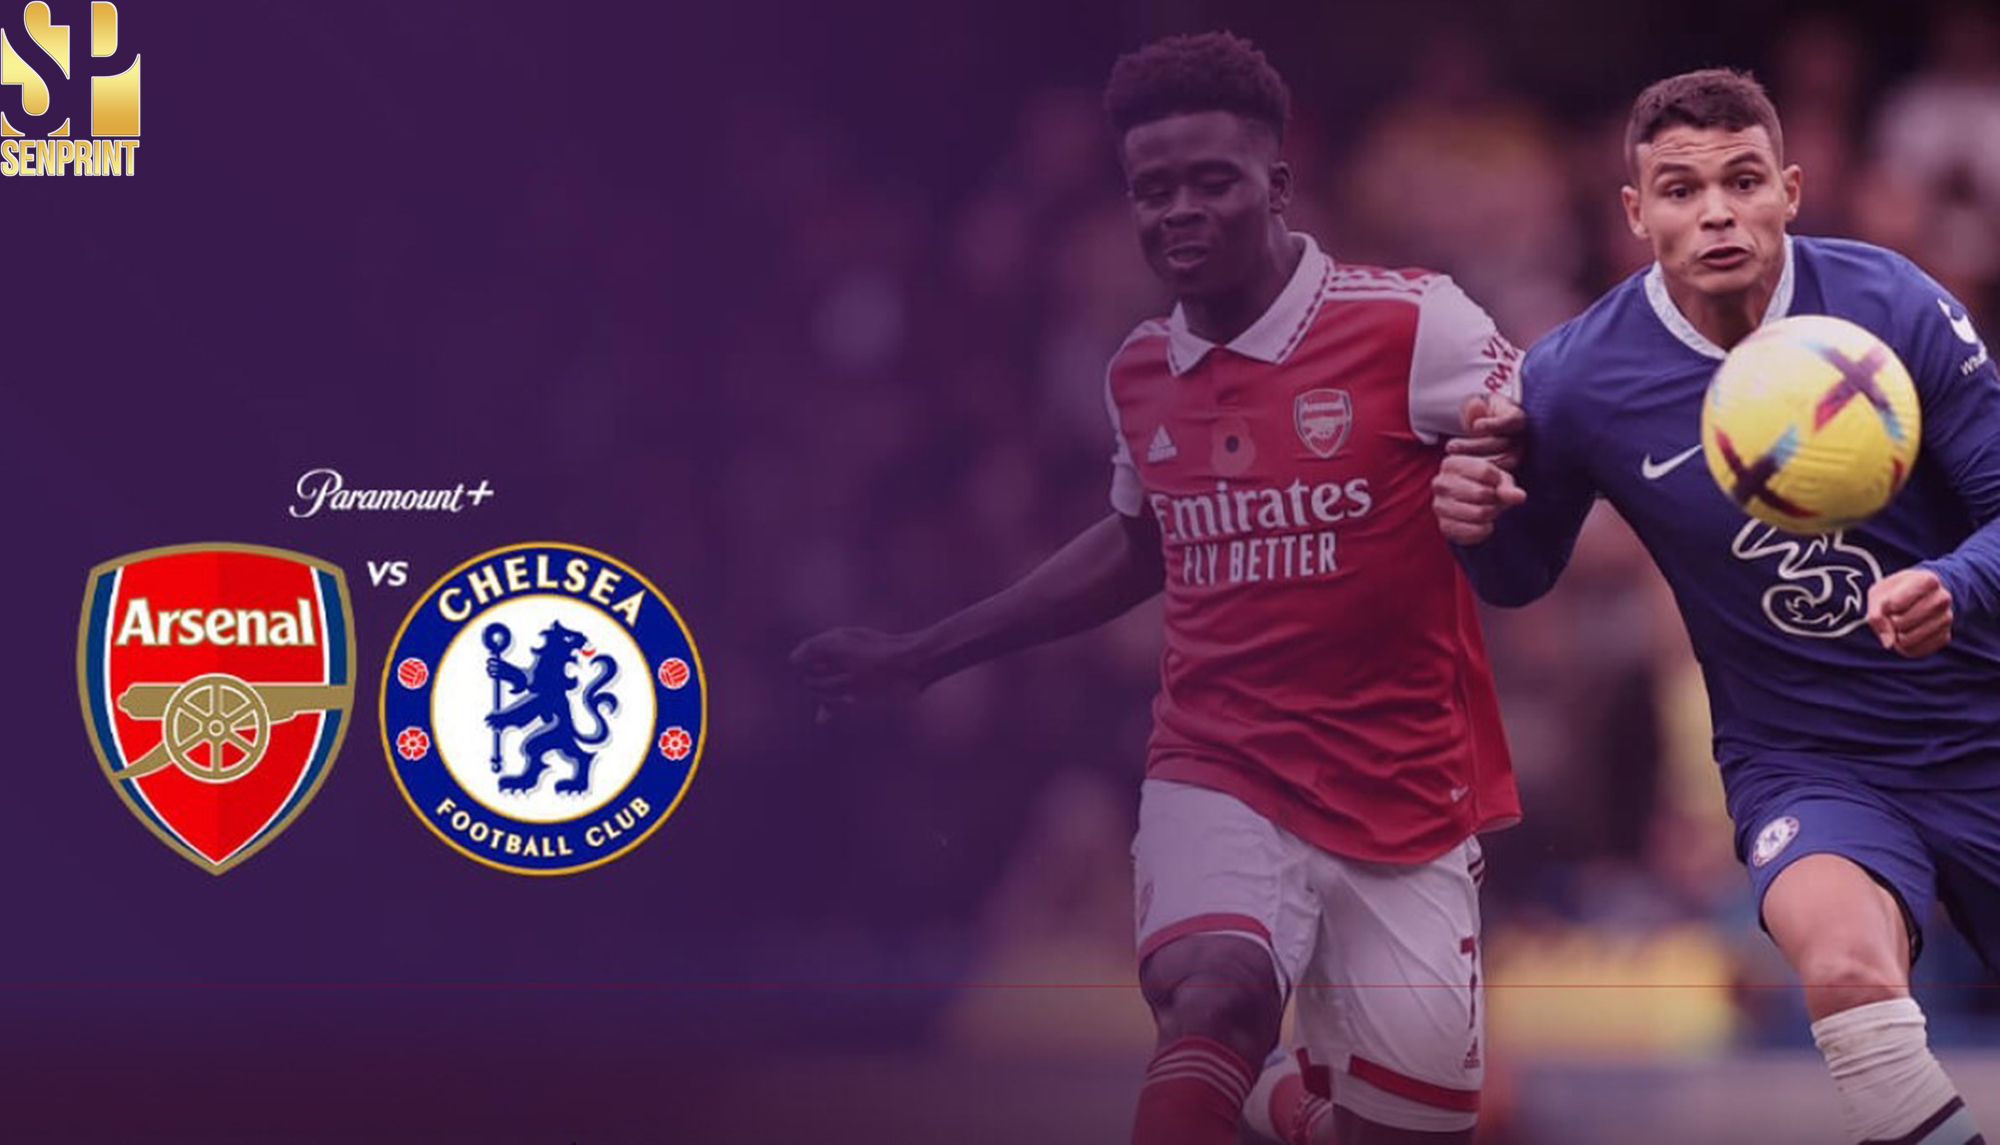 Chelsea vs. Arsenal: A Fiery Clash Lights Up London – The Latest News from Last Night's Thriller